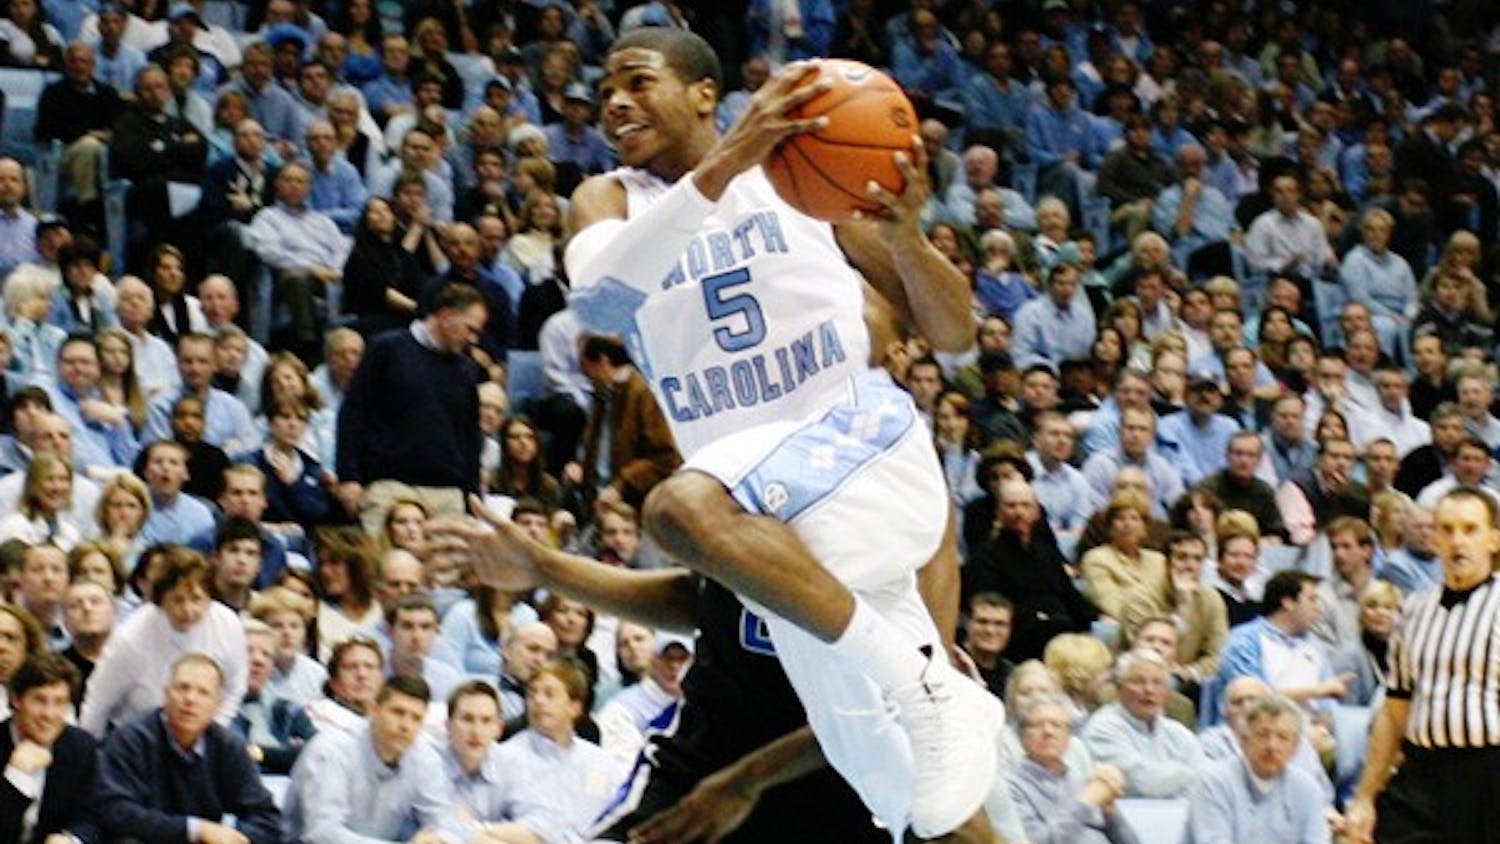 Dexter Strickland averages 5.6 points per game for UNC in his first season. DTH File/Phong Dinh